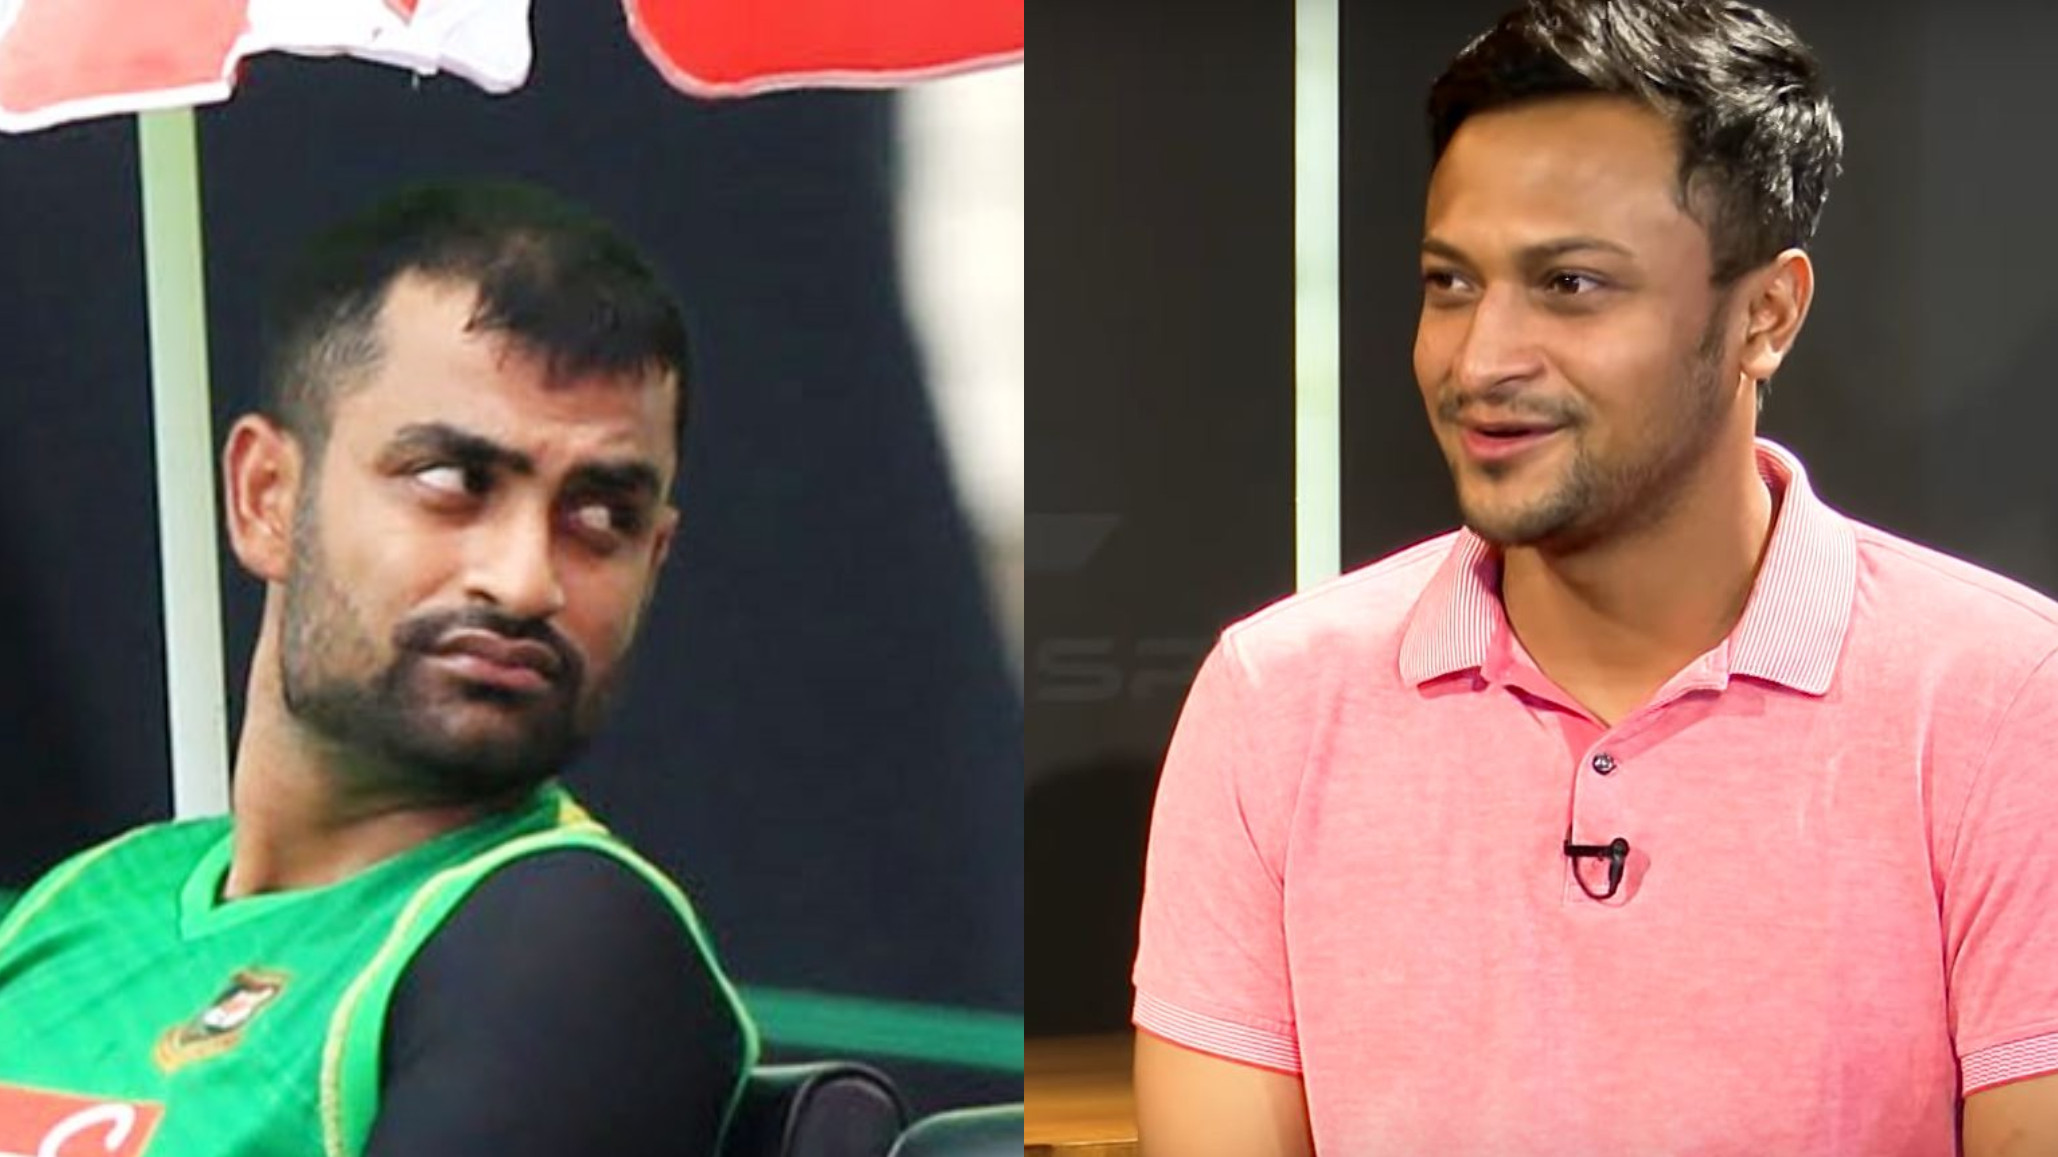 CWC 2023: Shakib Al Hasan calls Tamim Iqbal 'childish' and 'not a team man' in a scathing attack